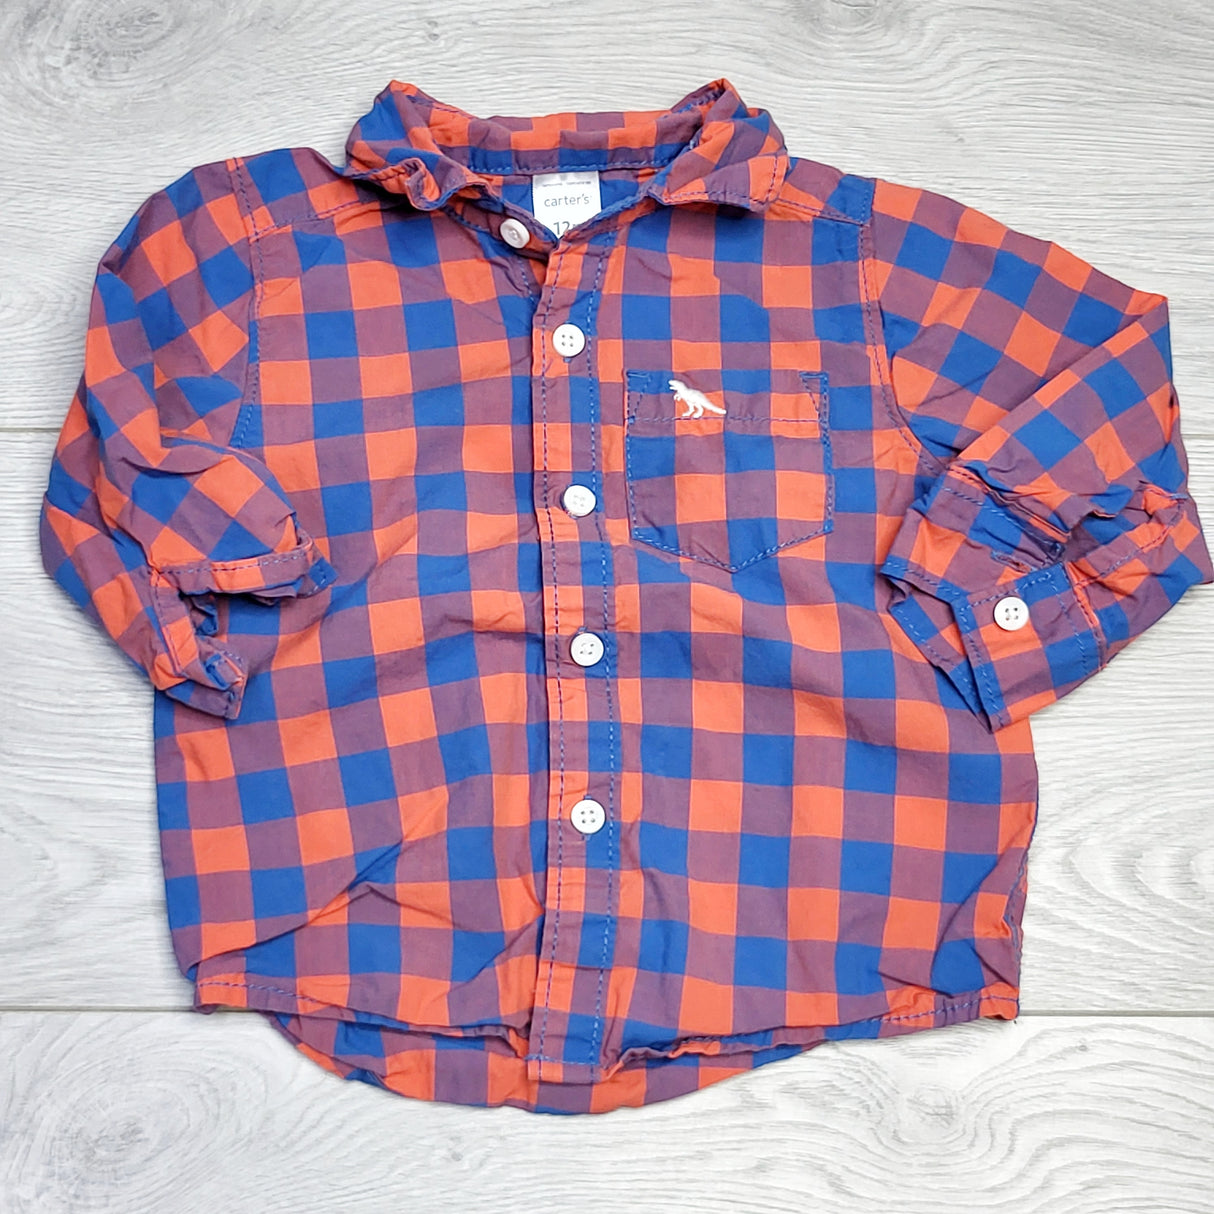 RZA2 - Carters blue and orange checked button down shirt. Size 12 months